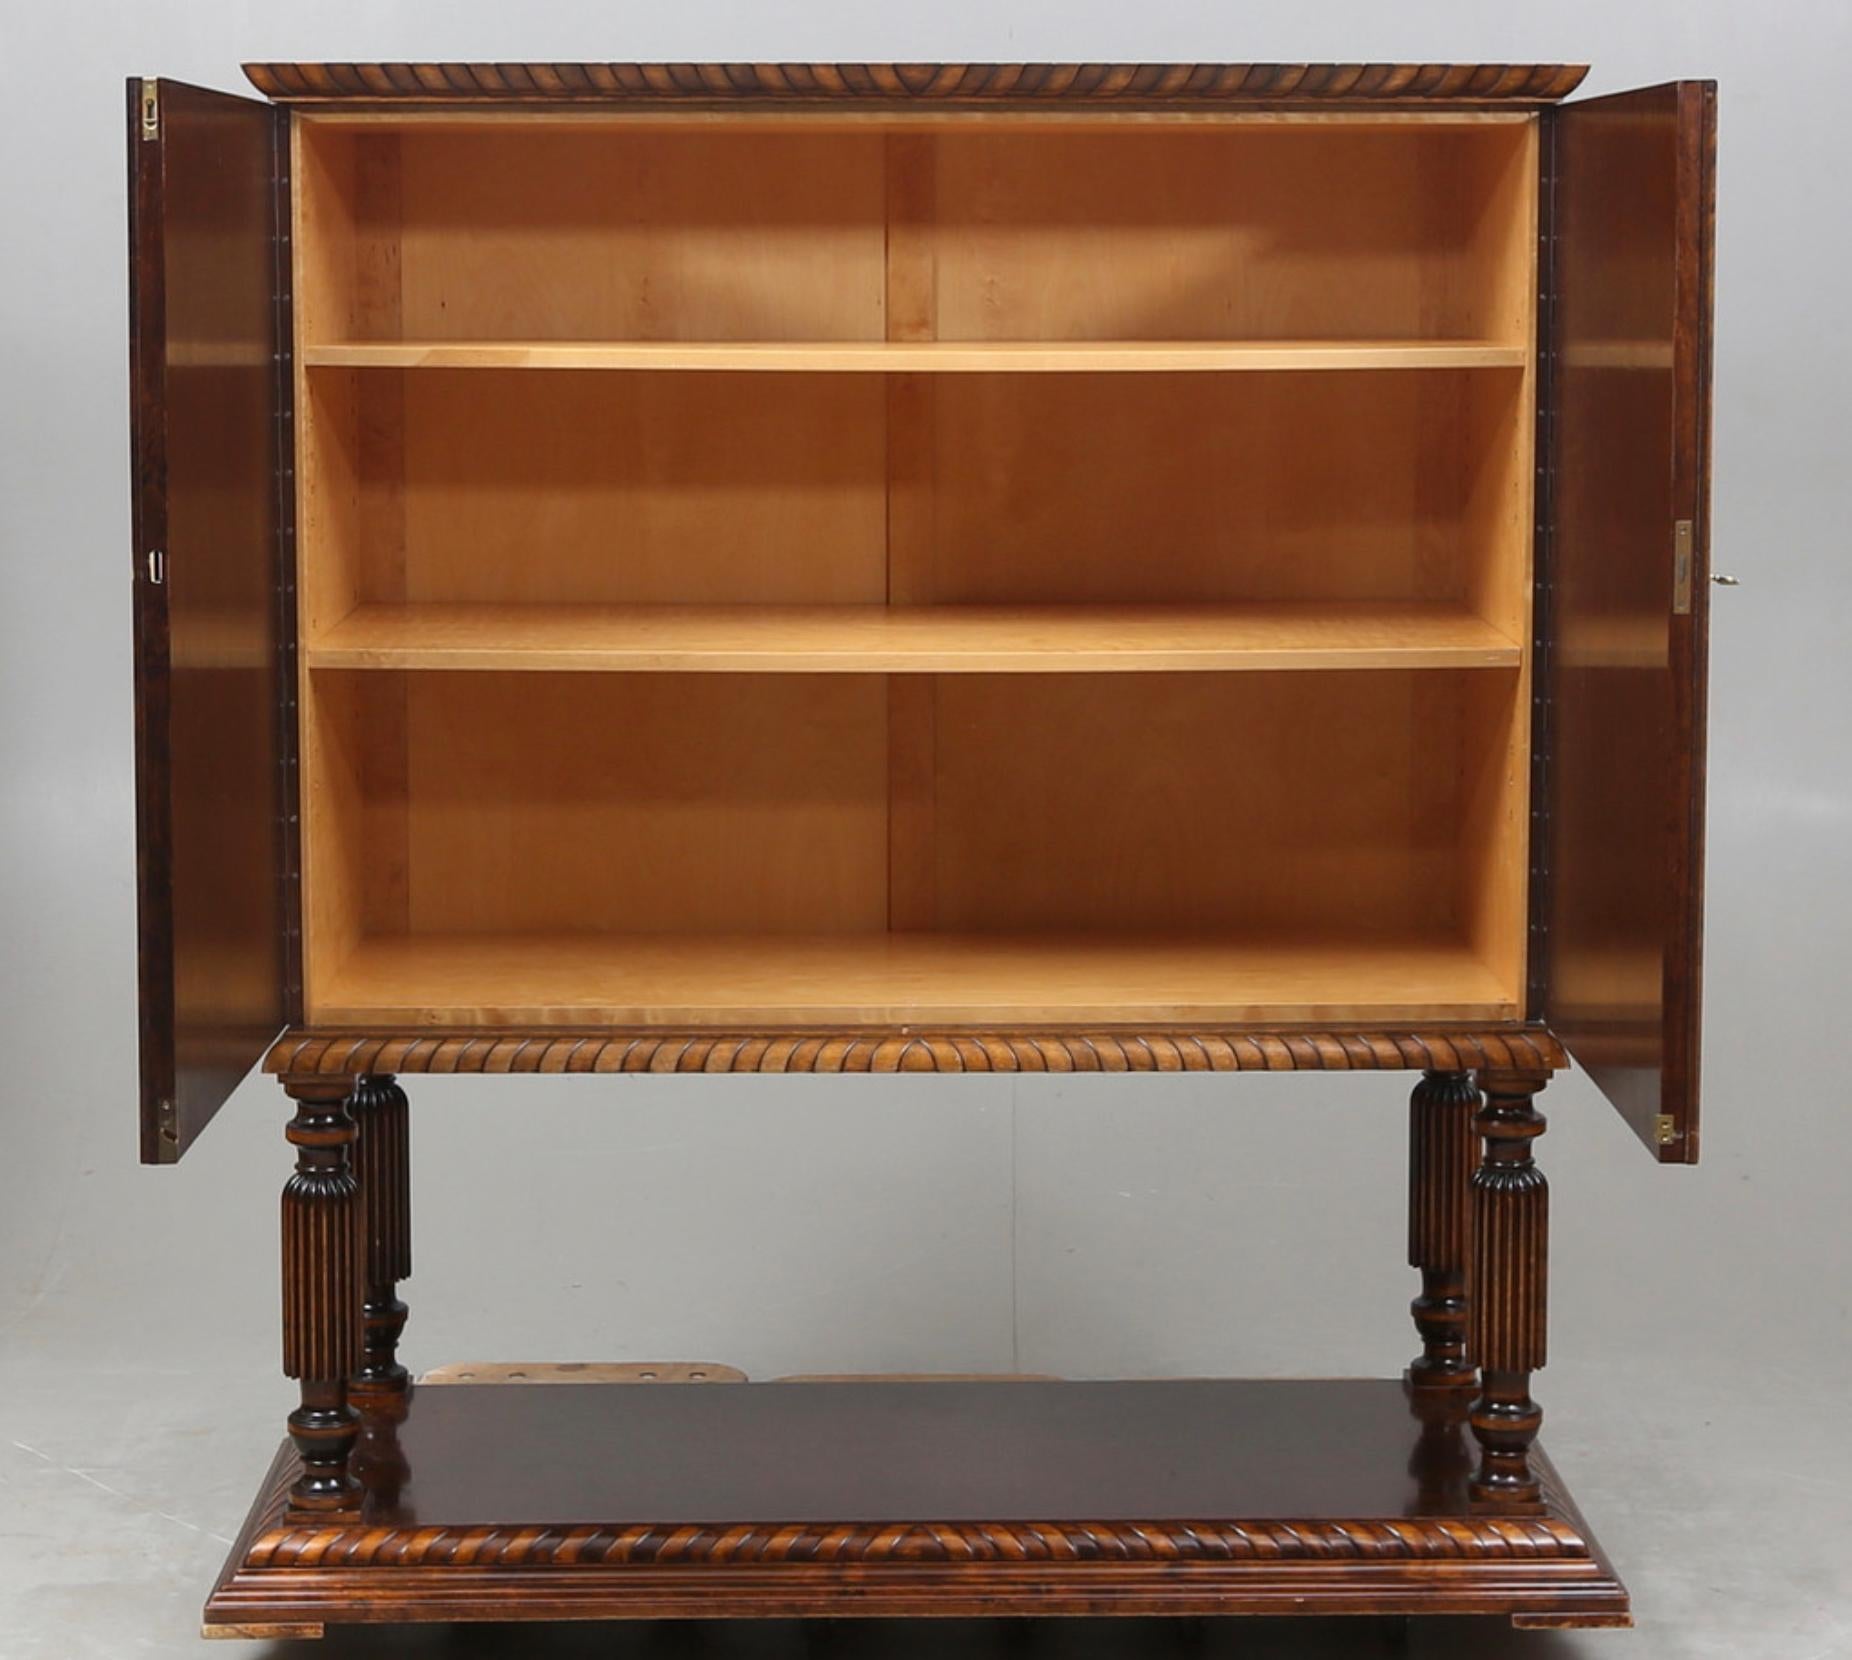 Cabinet by Axel Einar Hjorth In Good Condition For Sale In Long Island City, NY